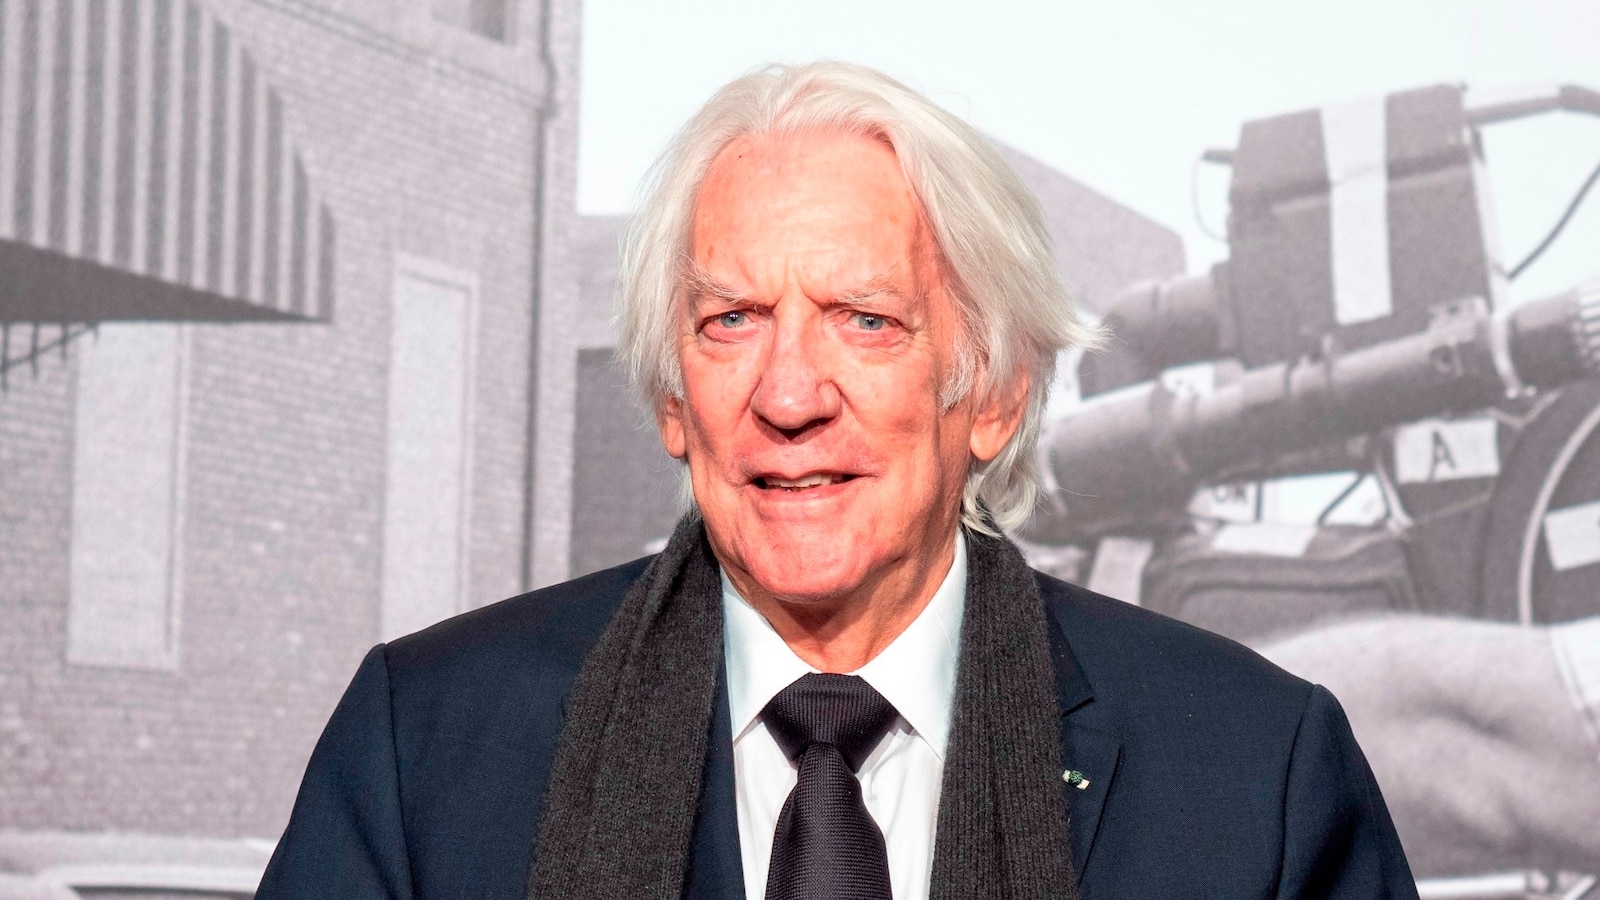 Actor Donald Sutherland, known for his roles in film and father of Kiefer Sutherland, passes away at age 88